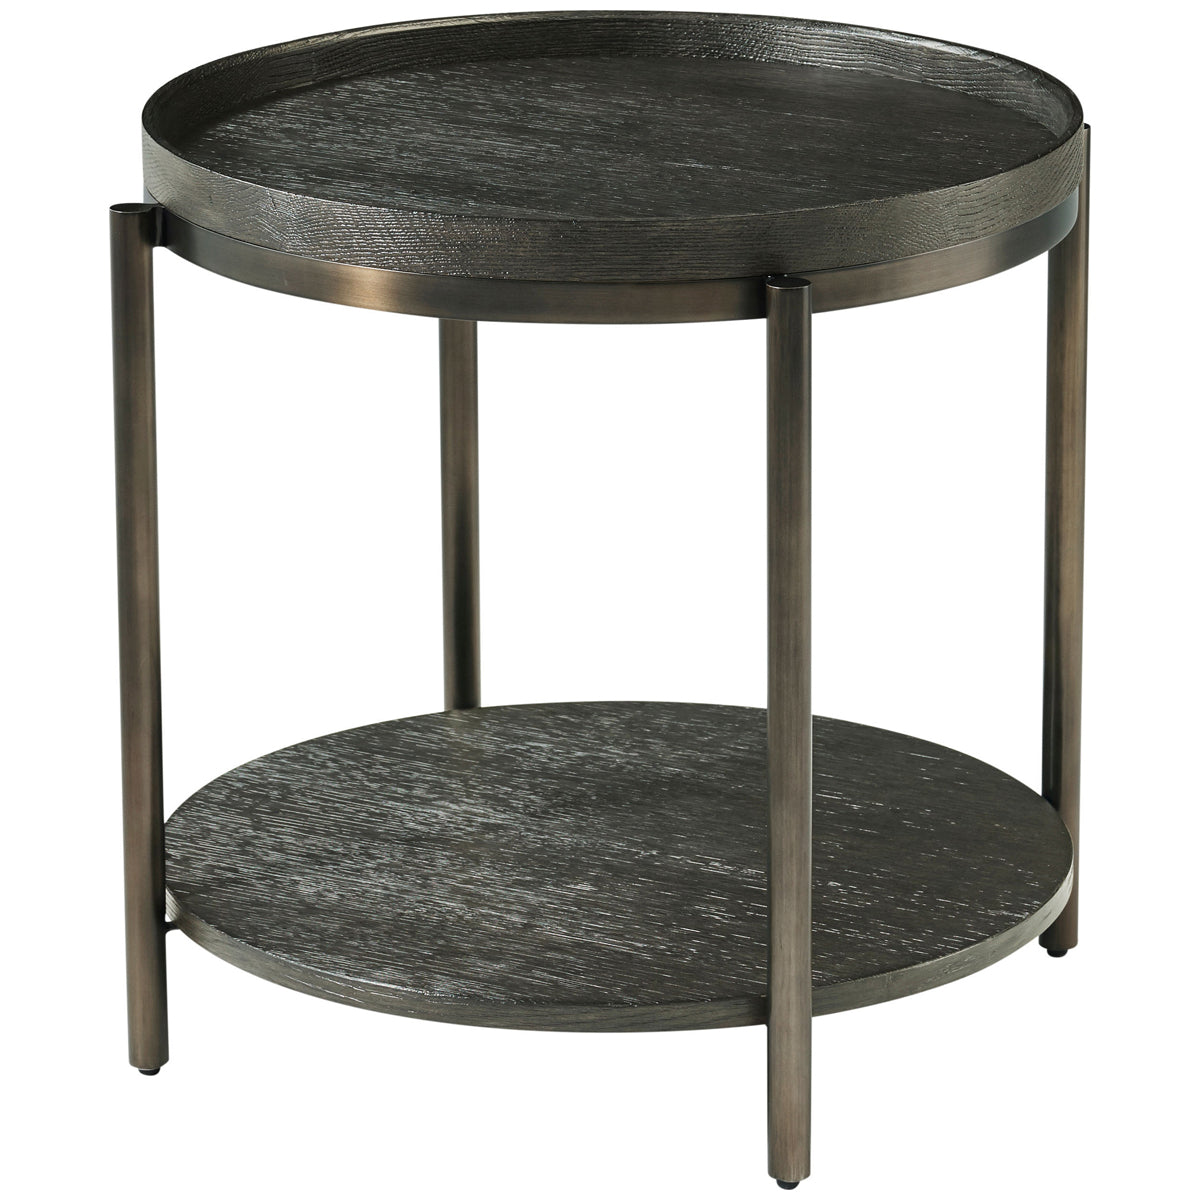 Theodore Alexander Repose Side Table